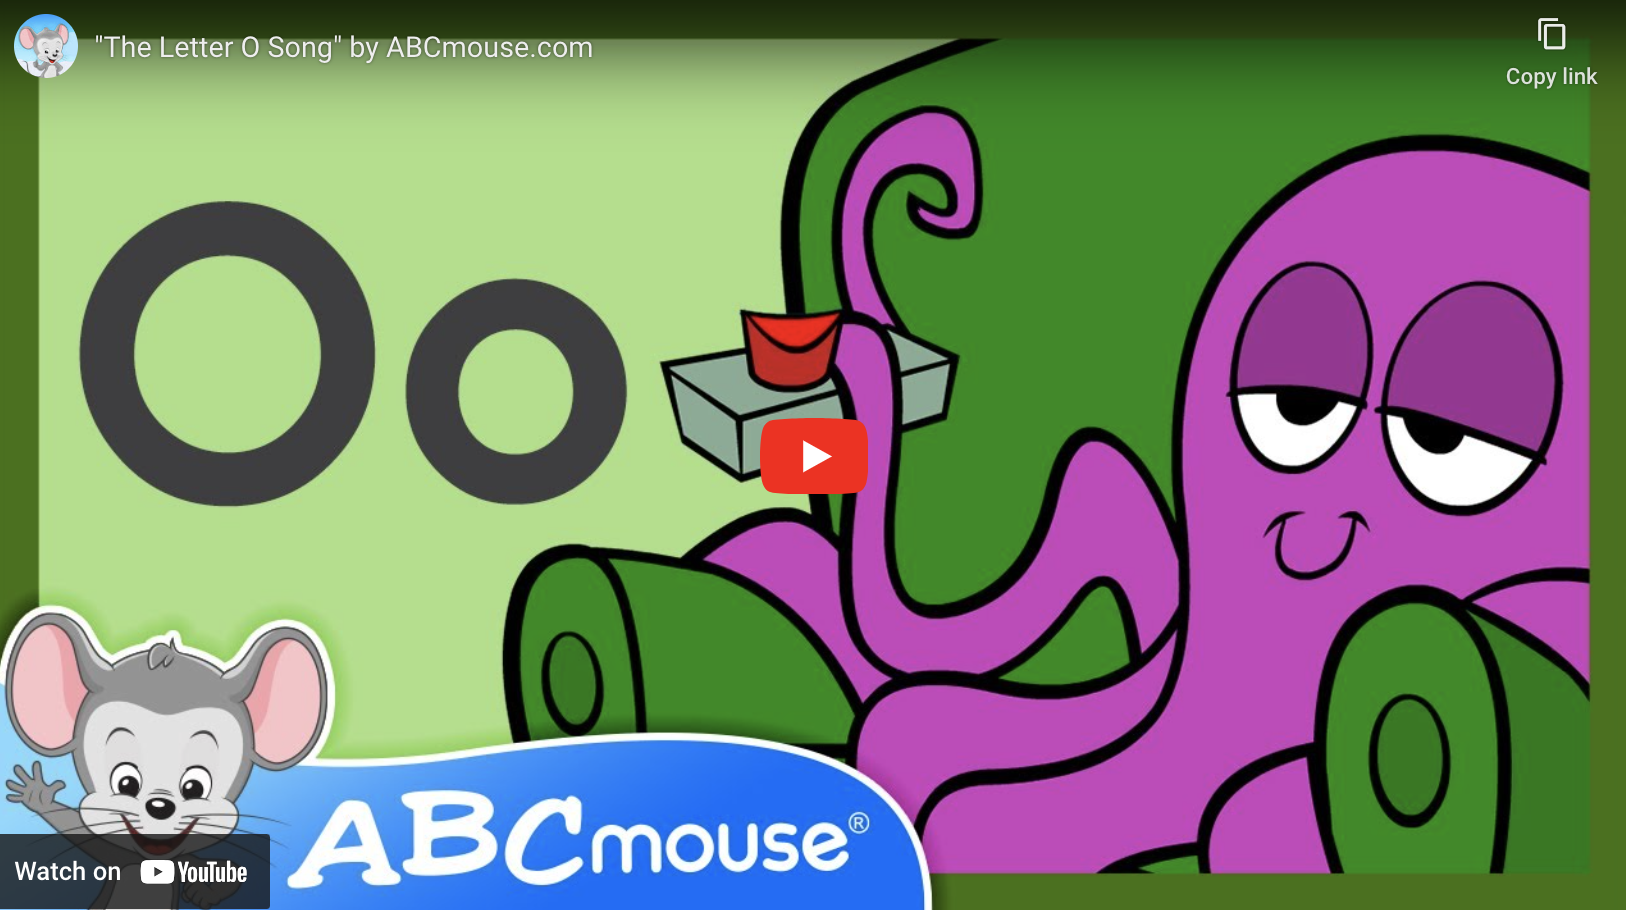 Letter o song video from ABCmouse.com. 